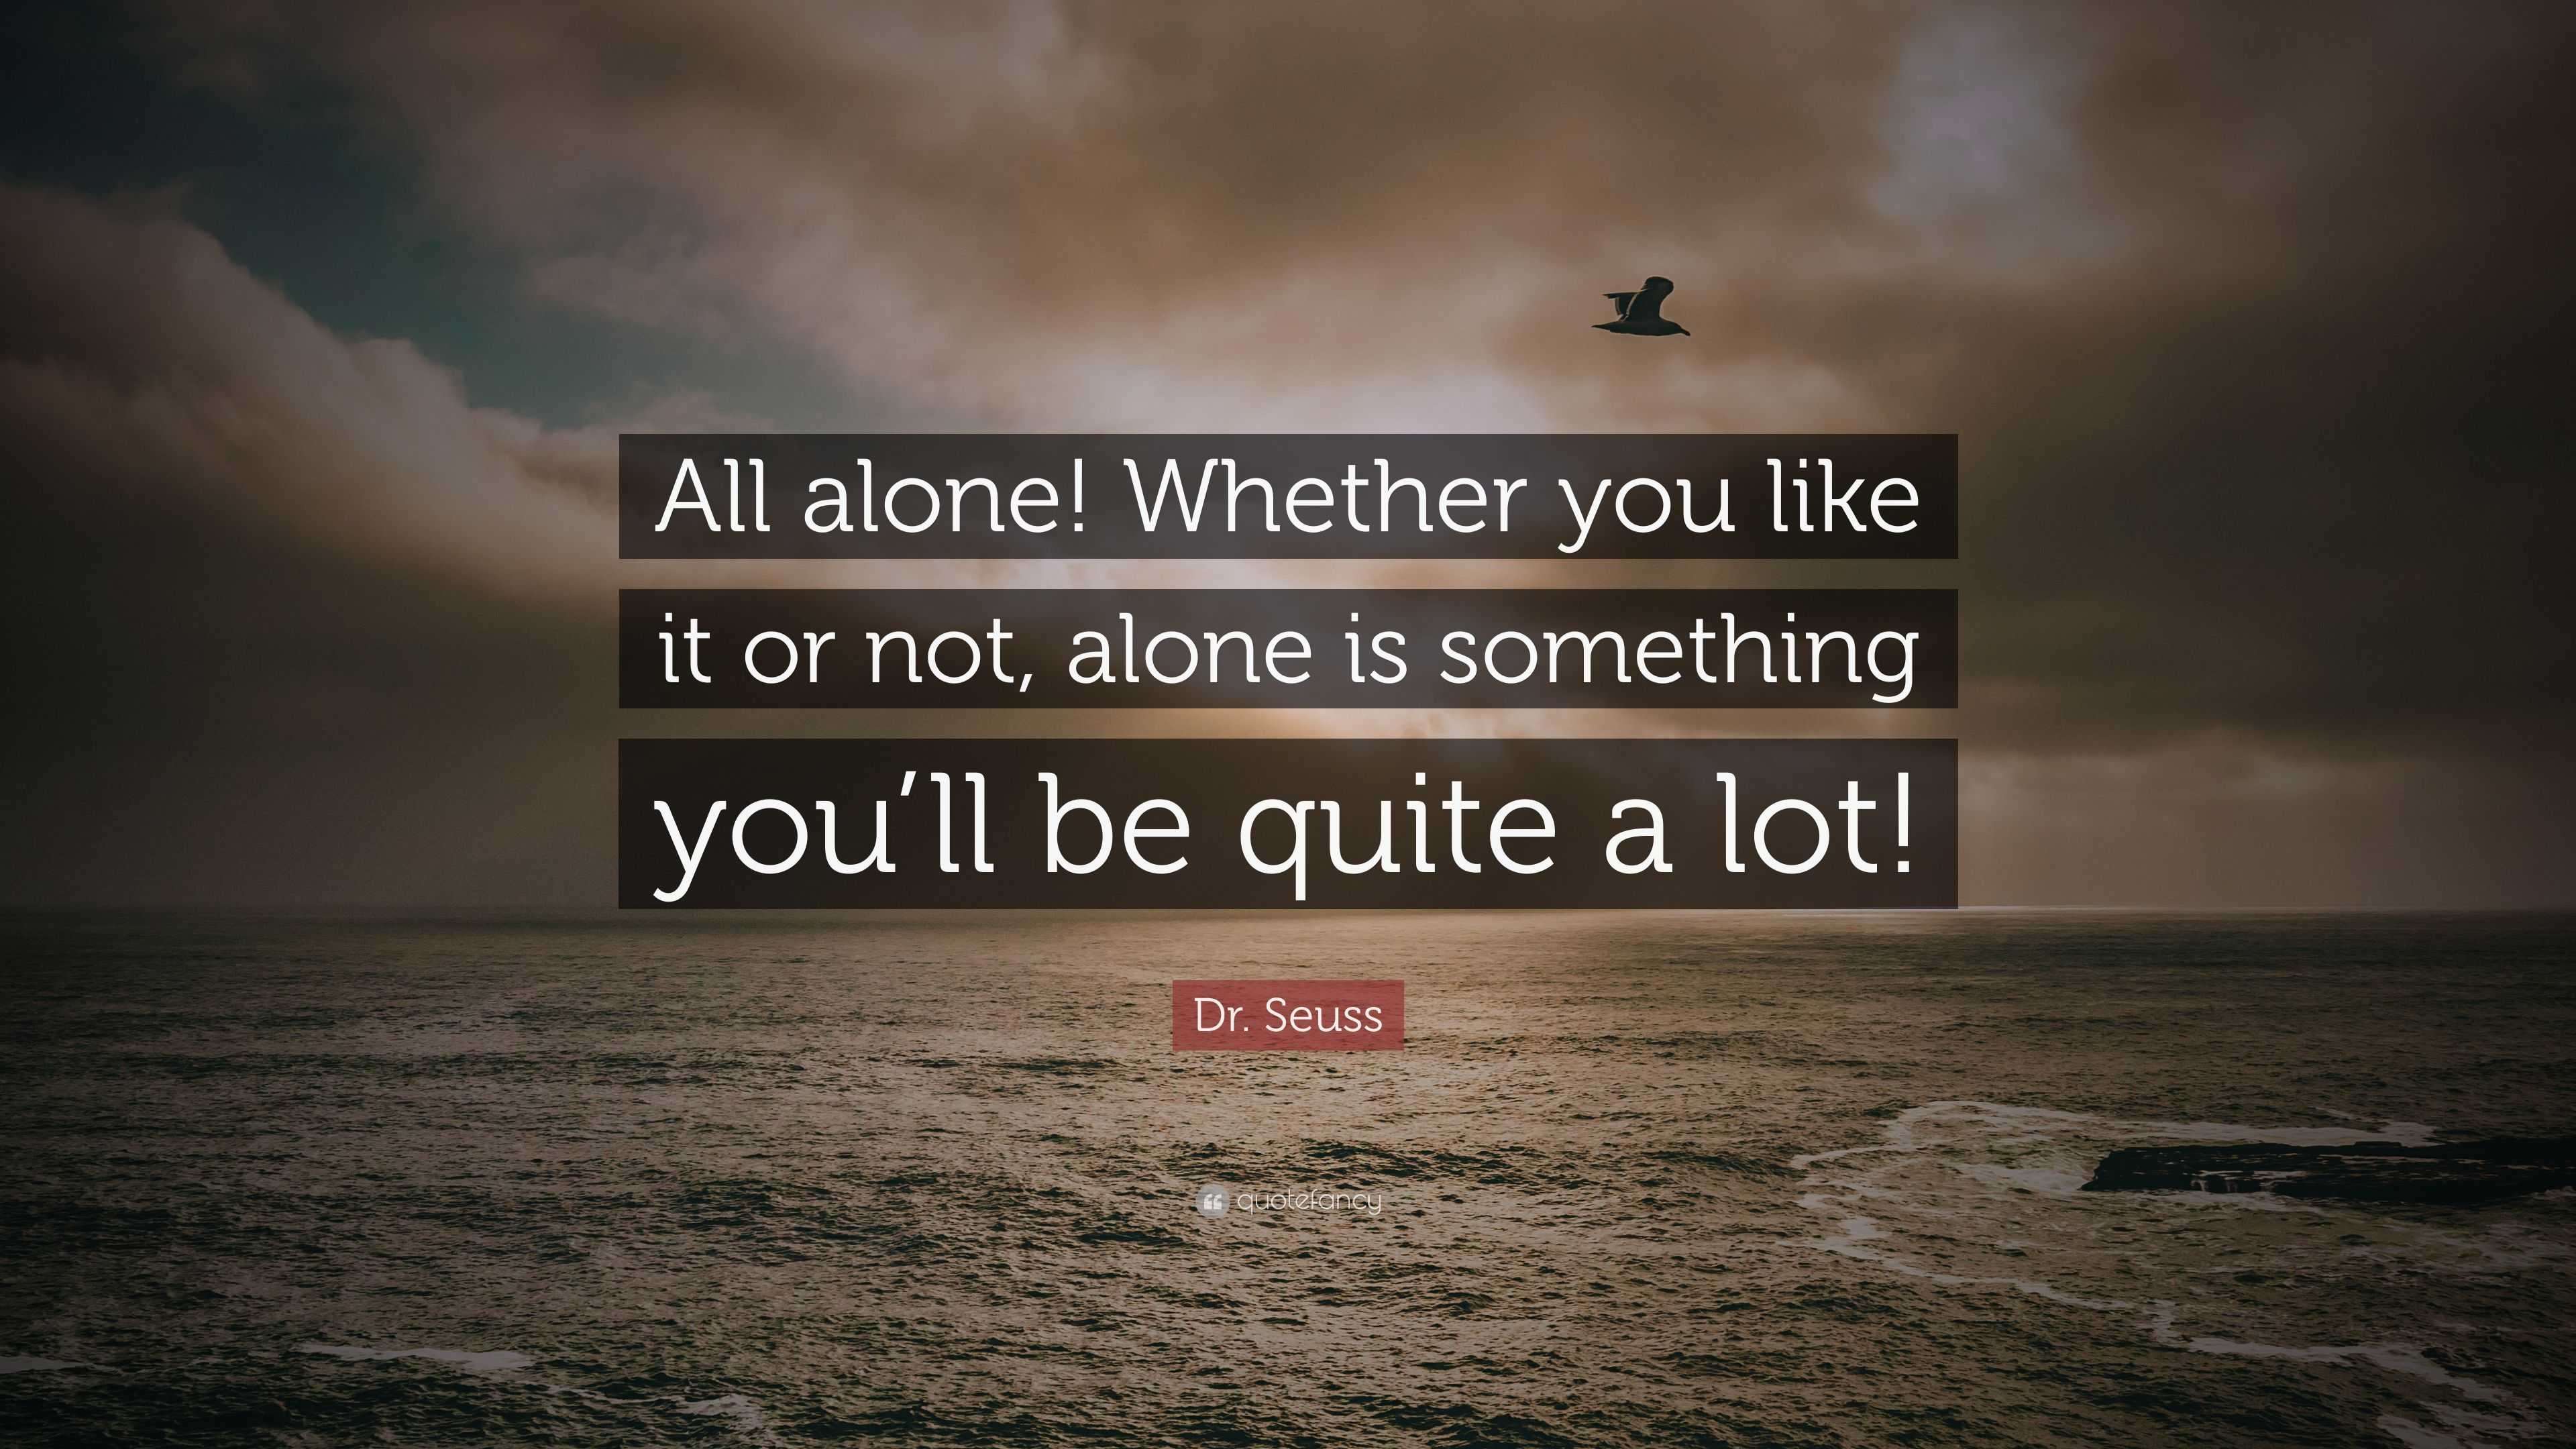 Dr. Seuss Quote: “All alone! Whether you like it or not, alone is